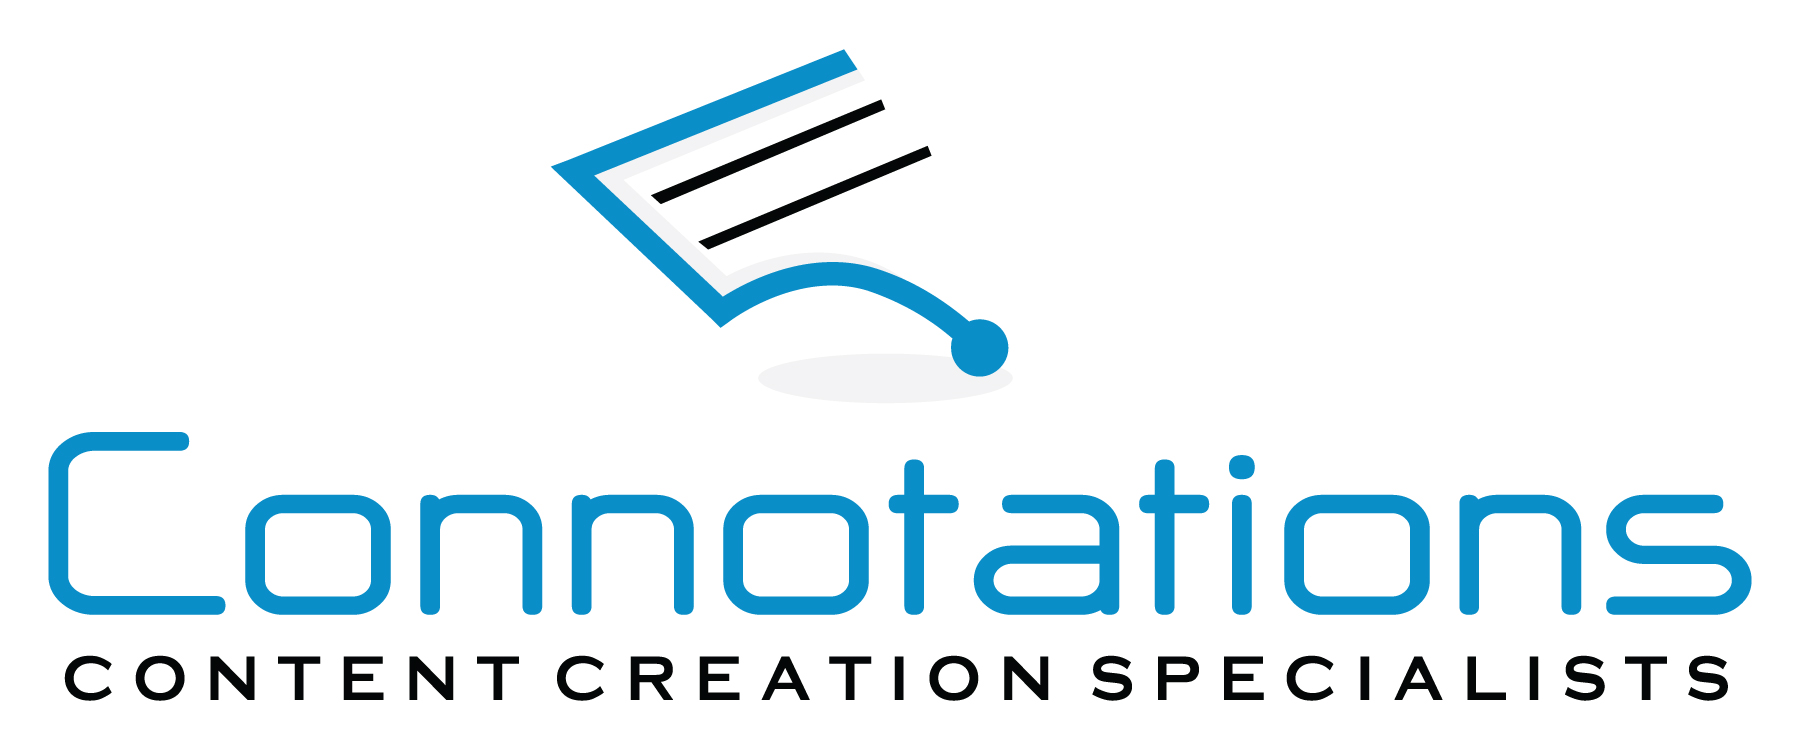 Connotations - Content Creation Specialists